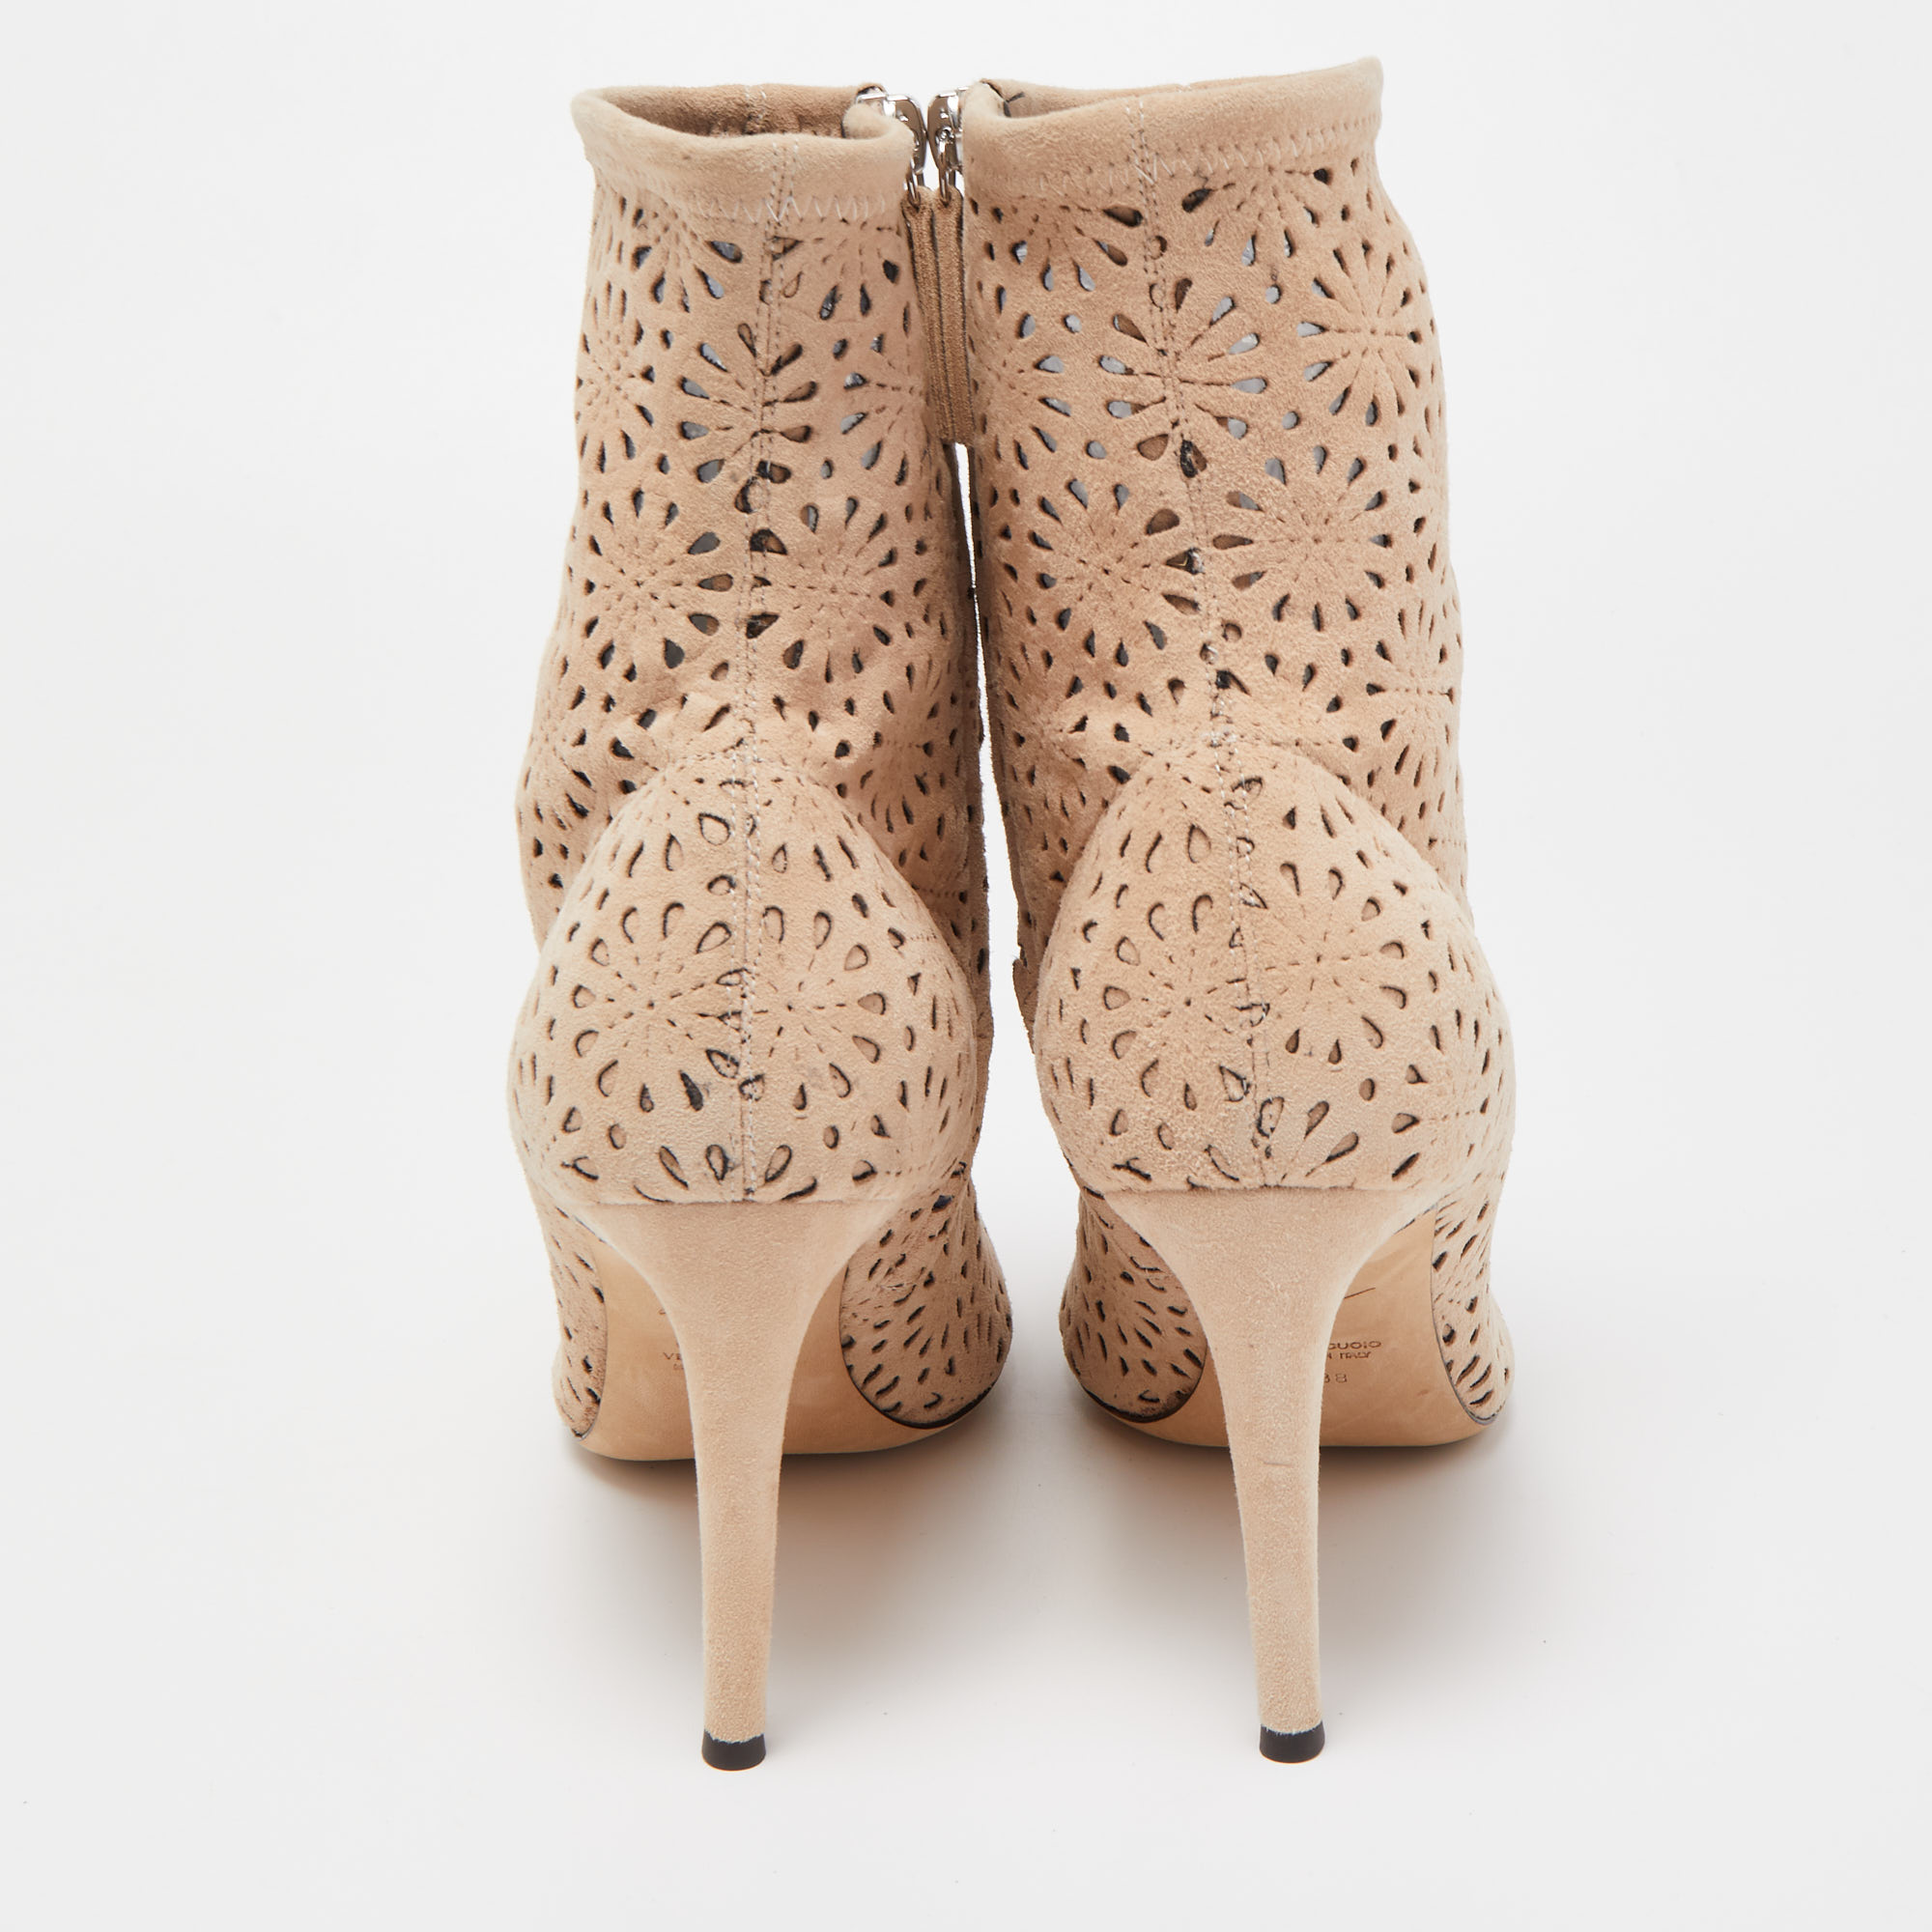 Giuseppe Zanotti Beige Suede Ankle Boots Size 38